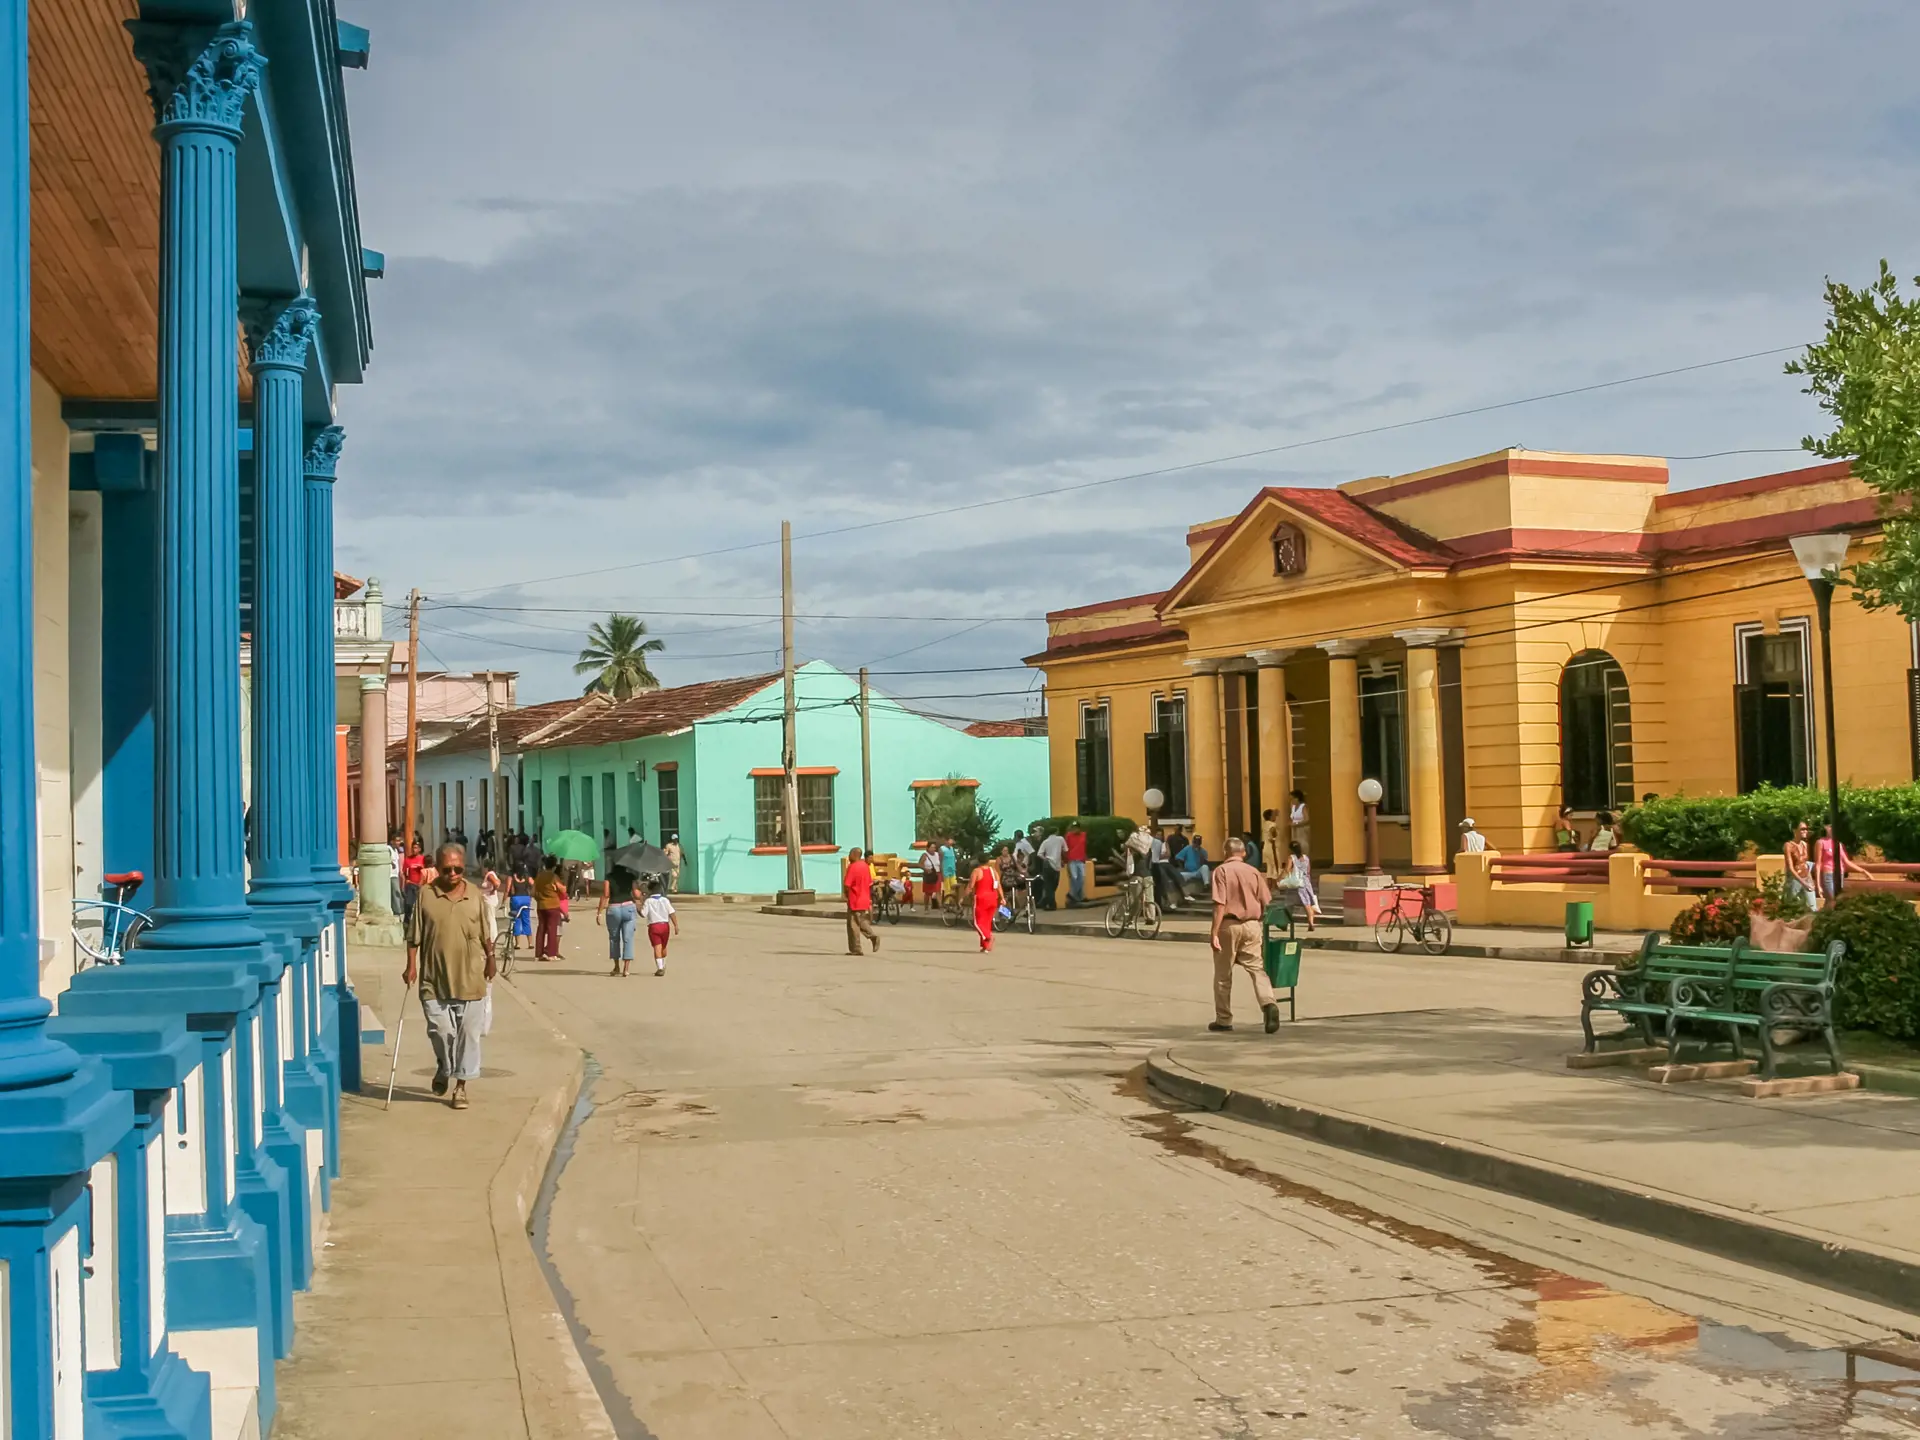 shutterstock_451773604 Street with colorful houses in colonial town Baracoa, Cuba.jpg